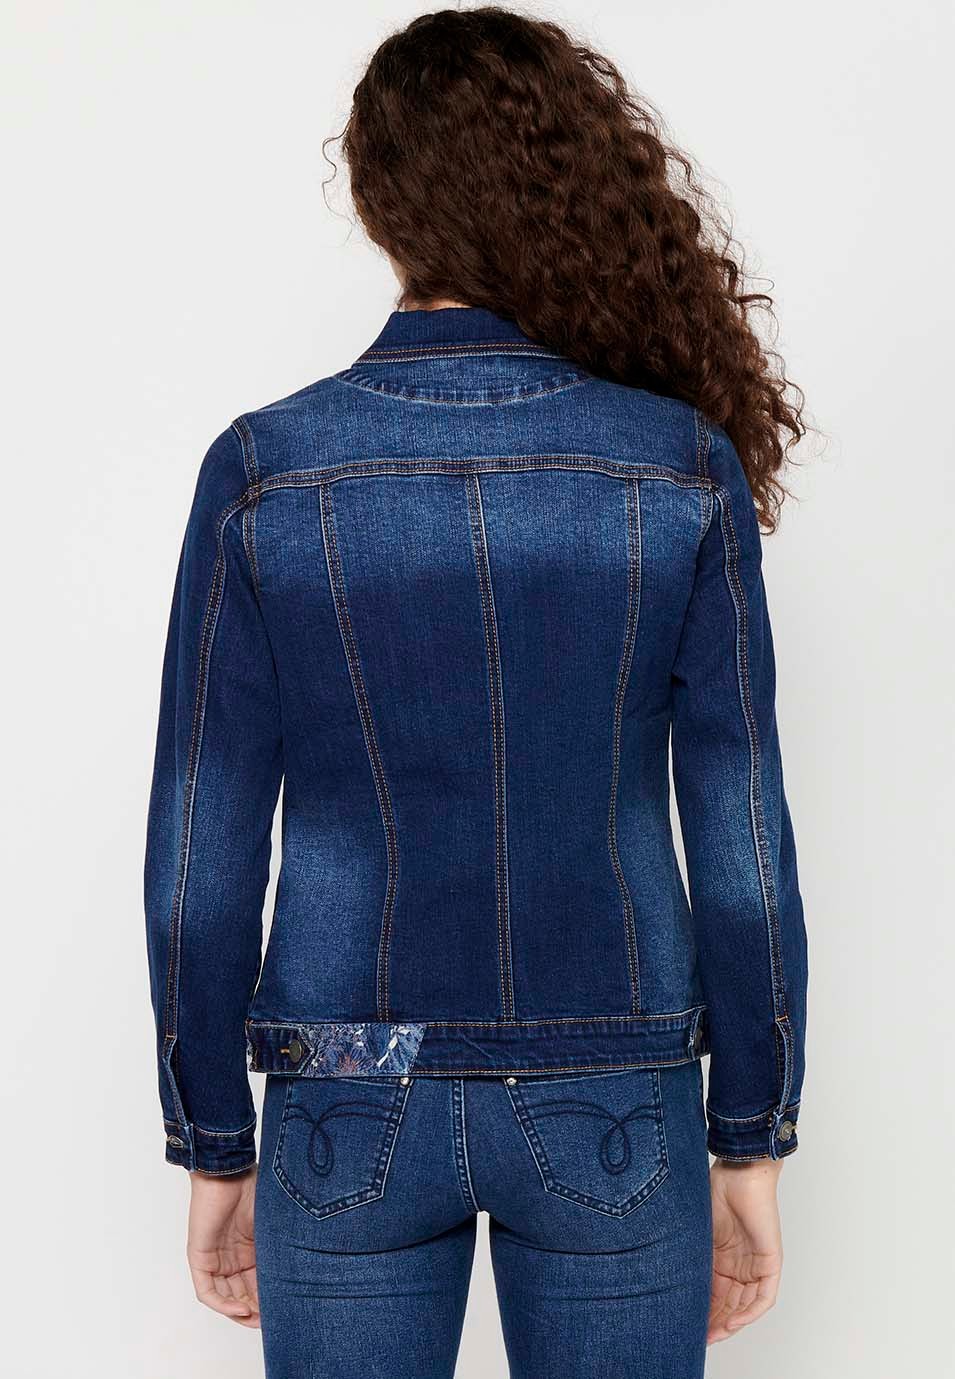 Dark Blue Long Sleeve Denim Jacket with Button Front Closure and Pockets with Embroidery on the Shoulders for Women 7